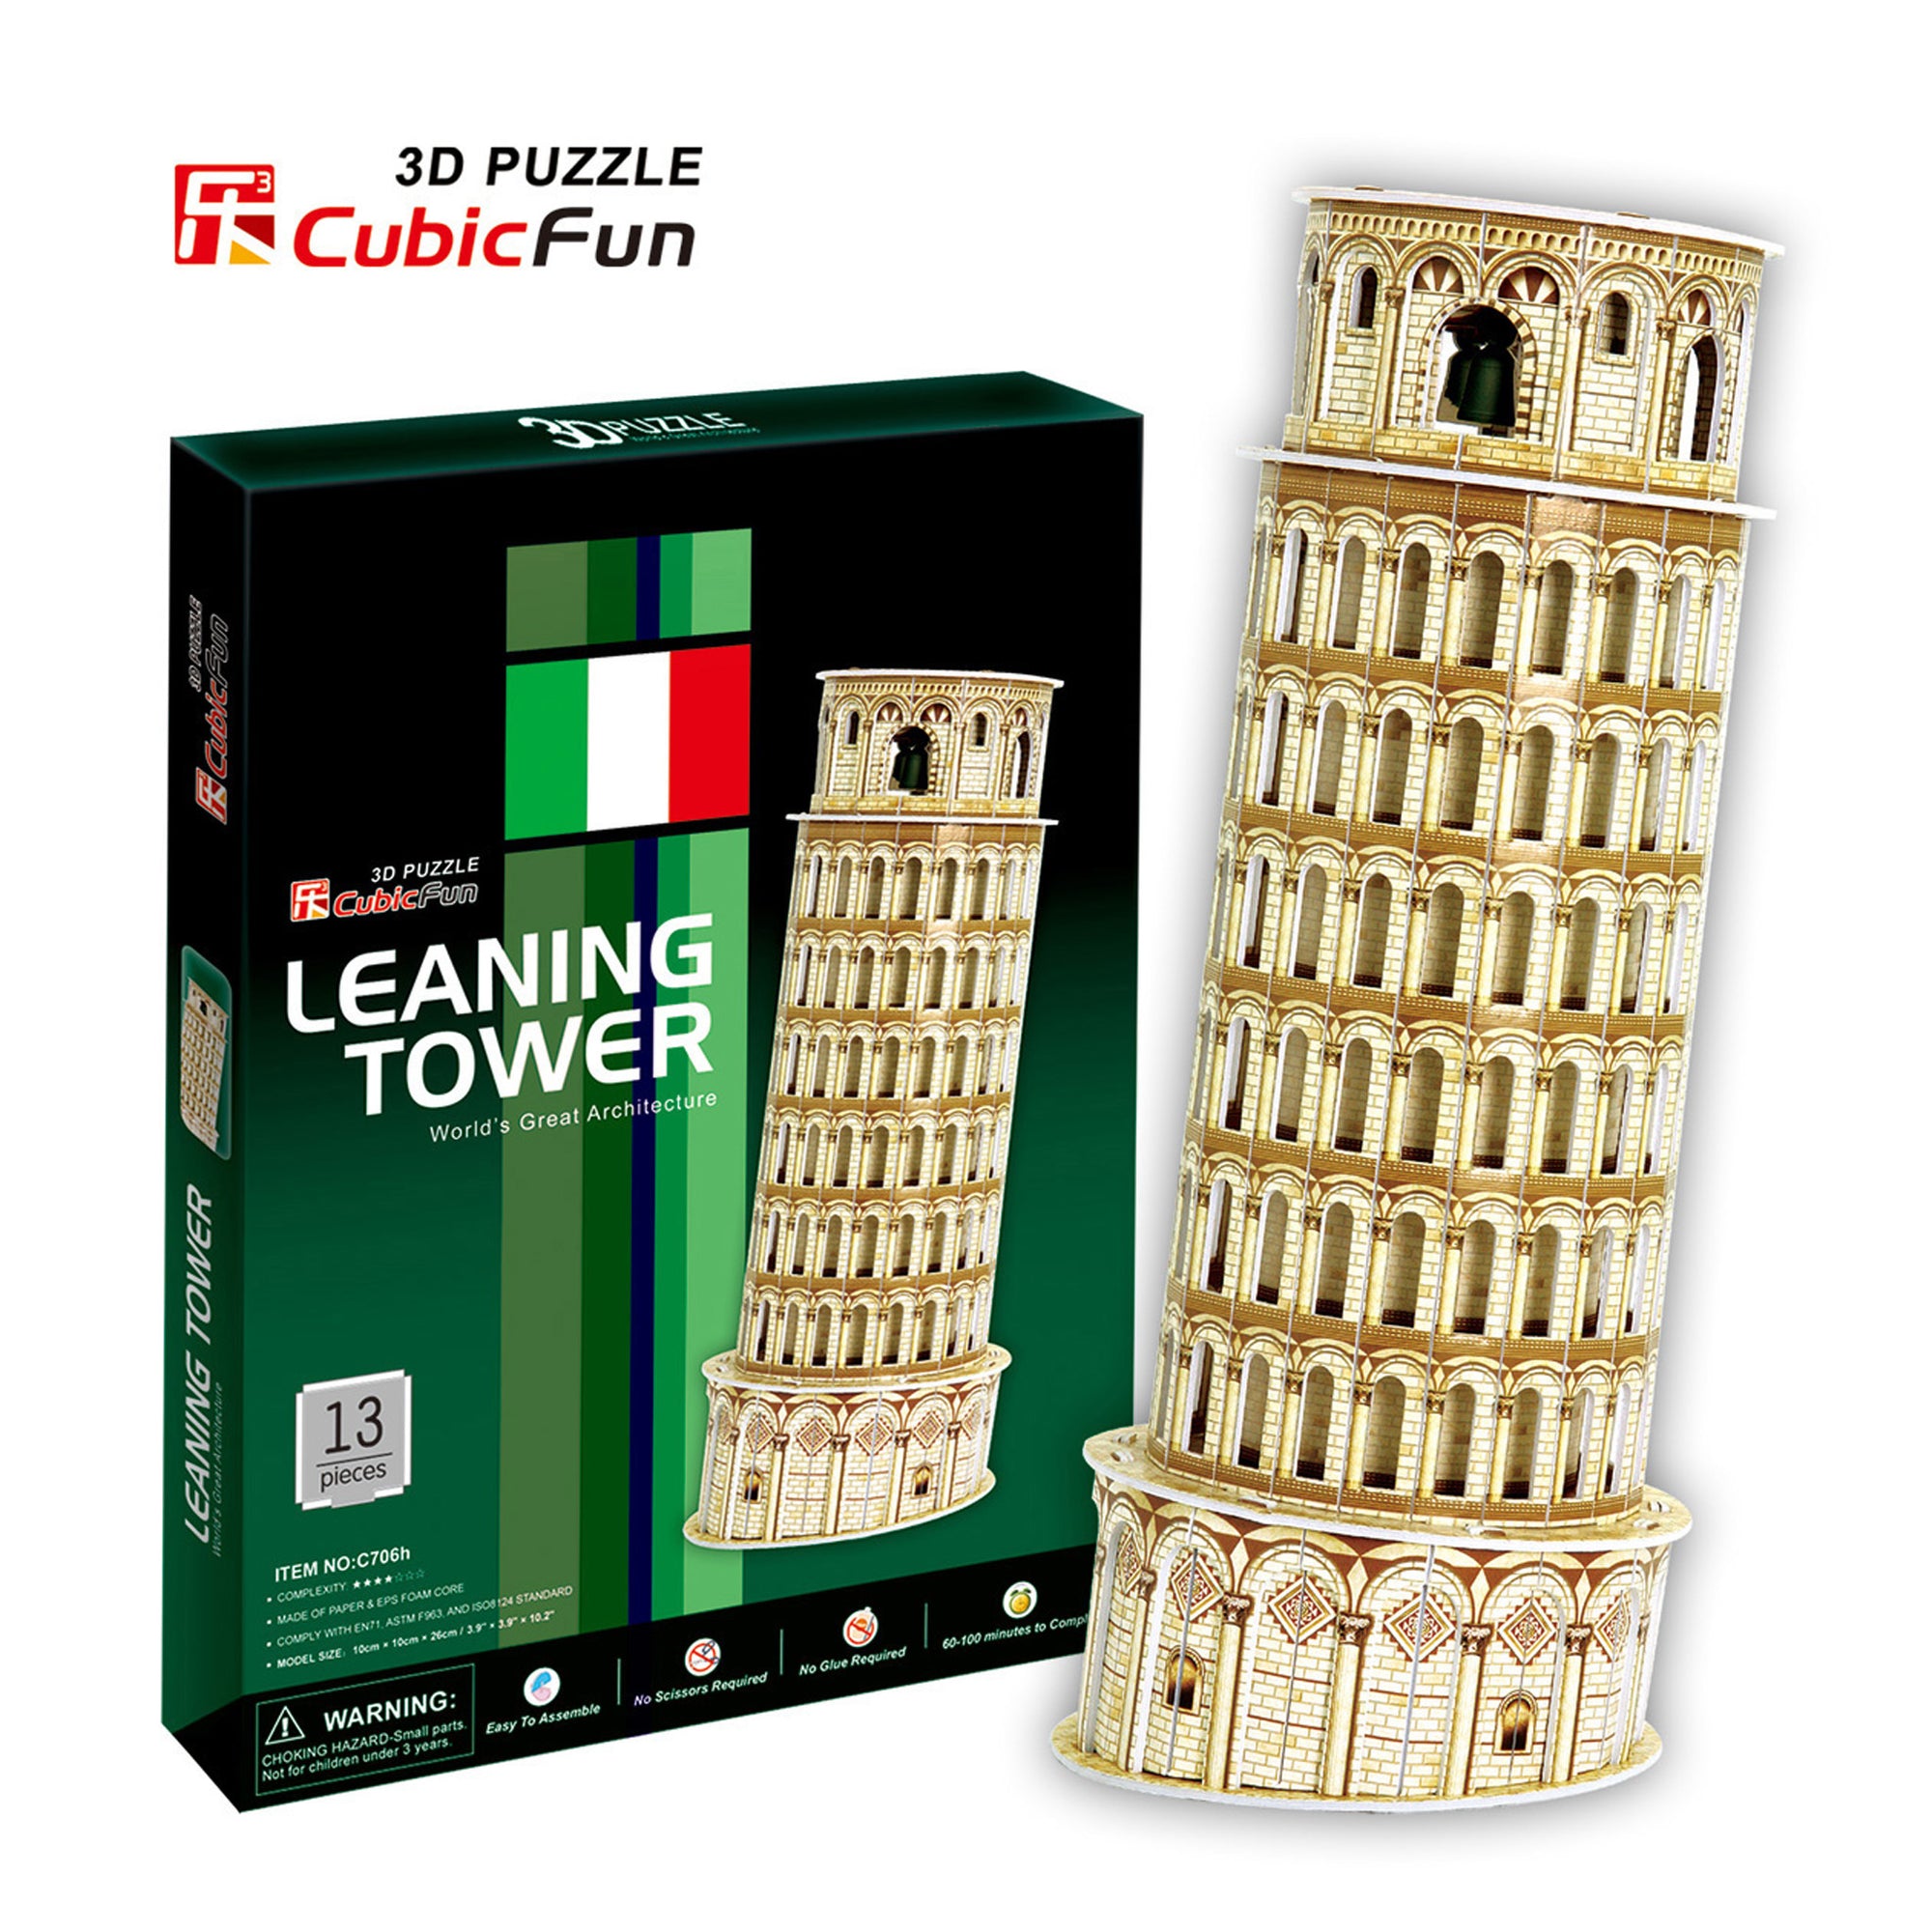 Leaning Tower of Pisa, 13pc 3D Puzzle